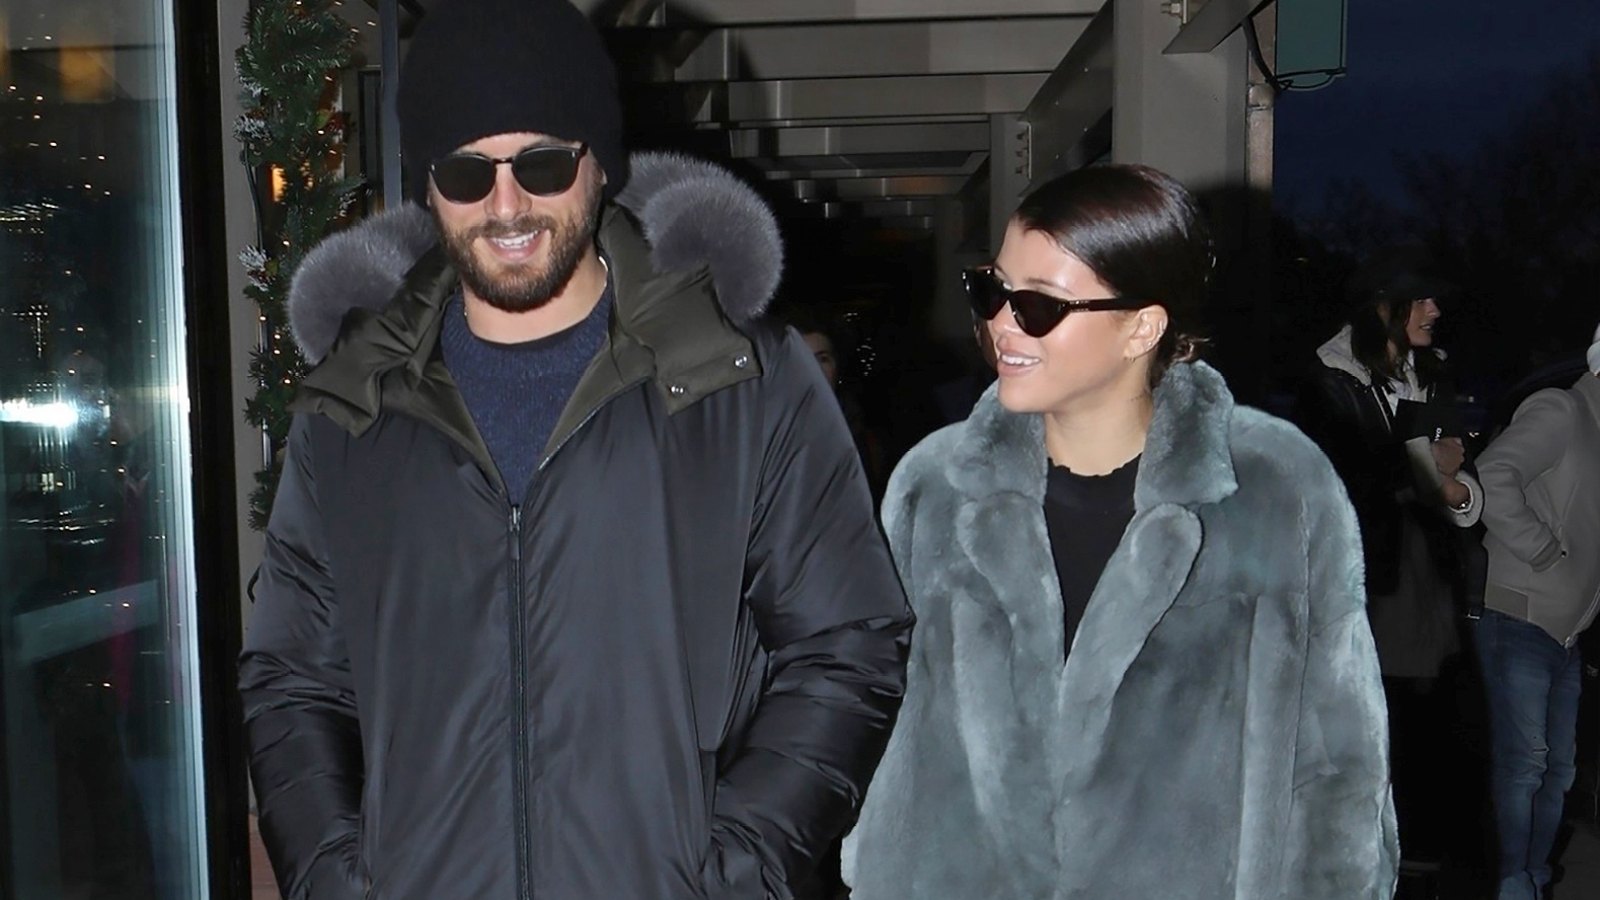 Scott Disick, Sofia Richie Step Out in Aspen for Date Night: Pic